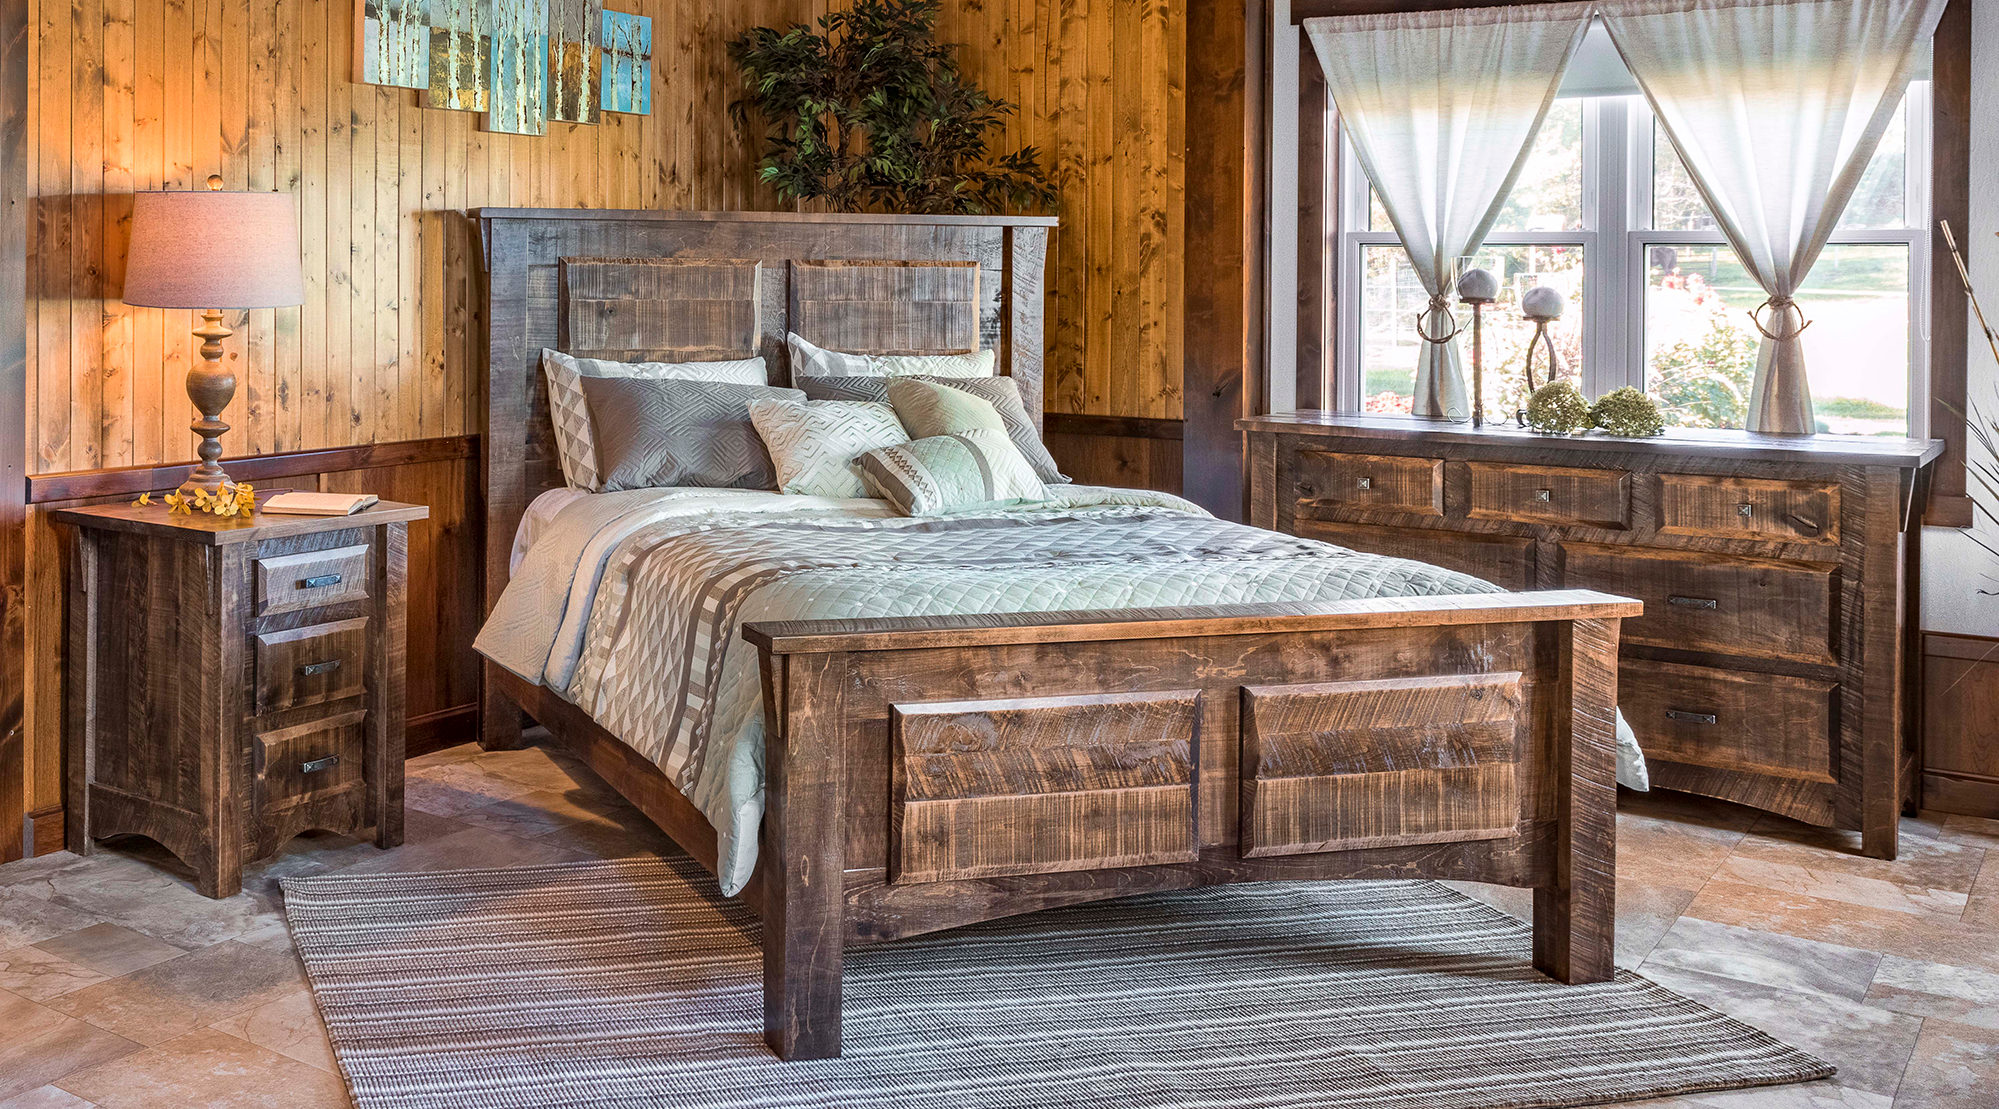 Hilltop Hickory RoughCut Maplewood 2 Panel Bedroom Setting